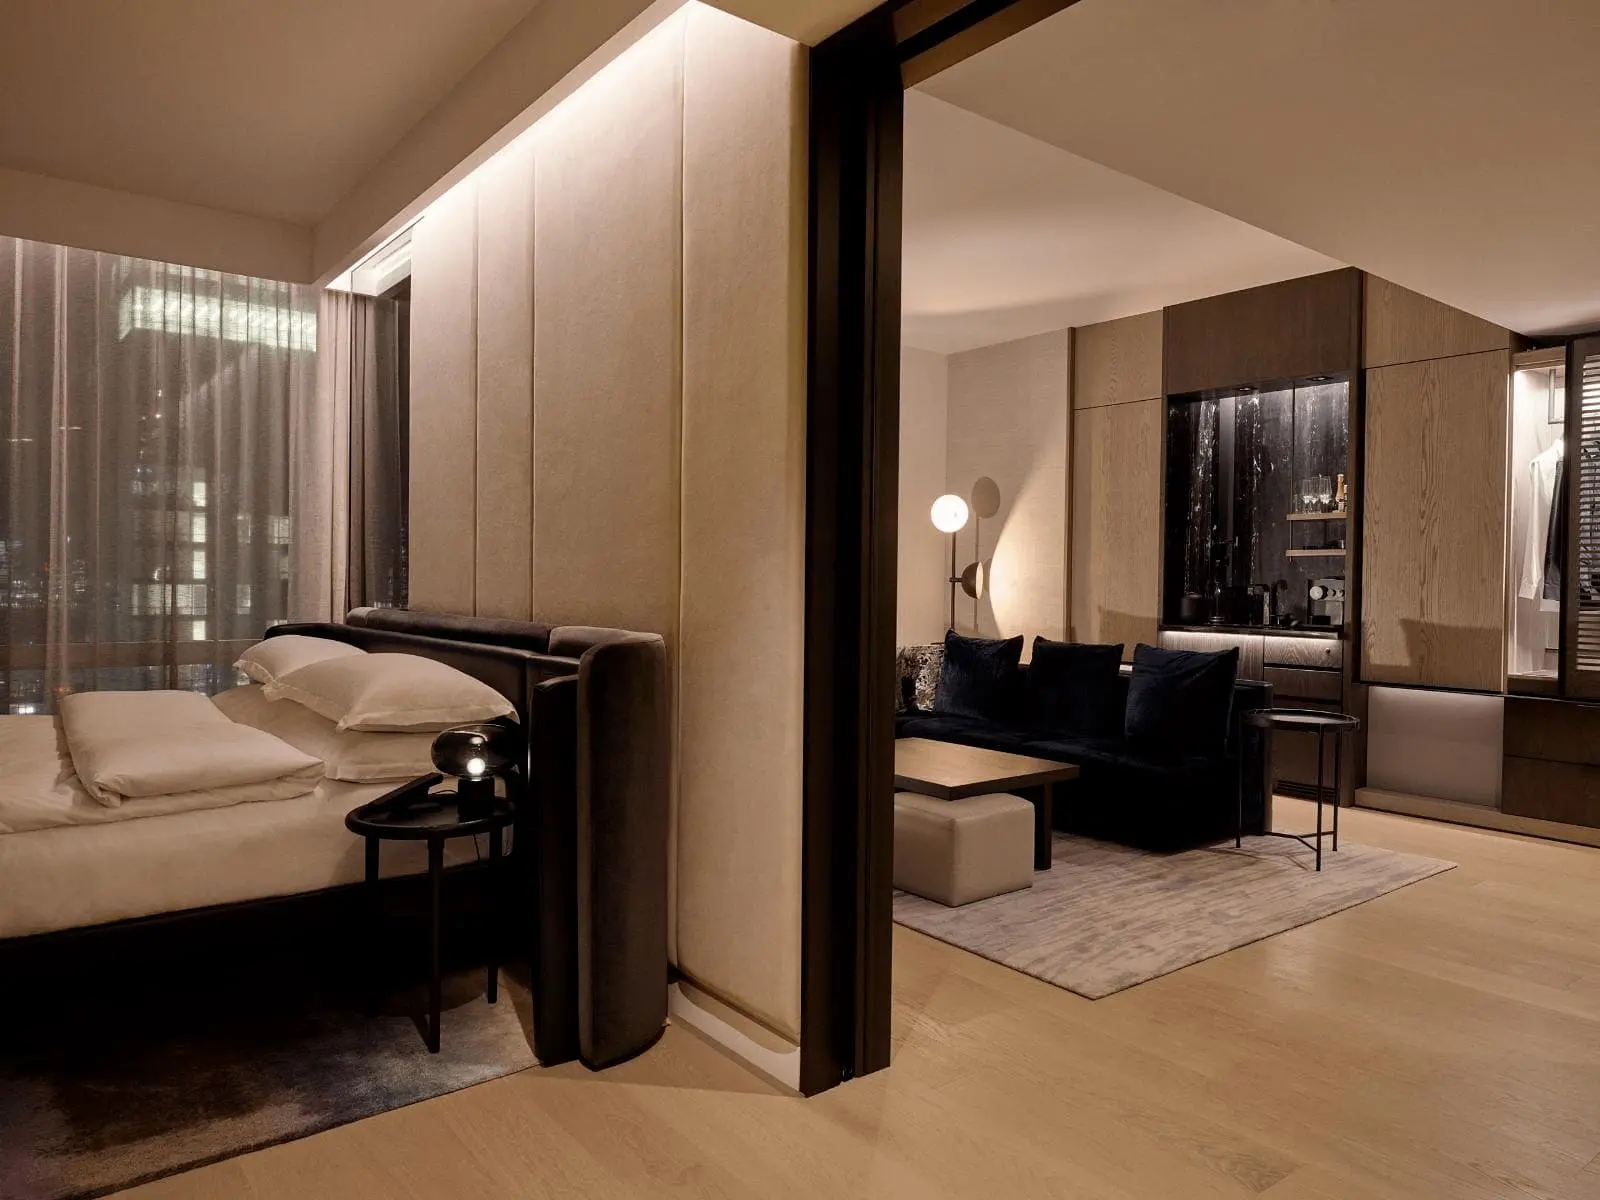 Well appointed rooms at Equinox